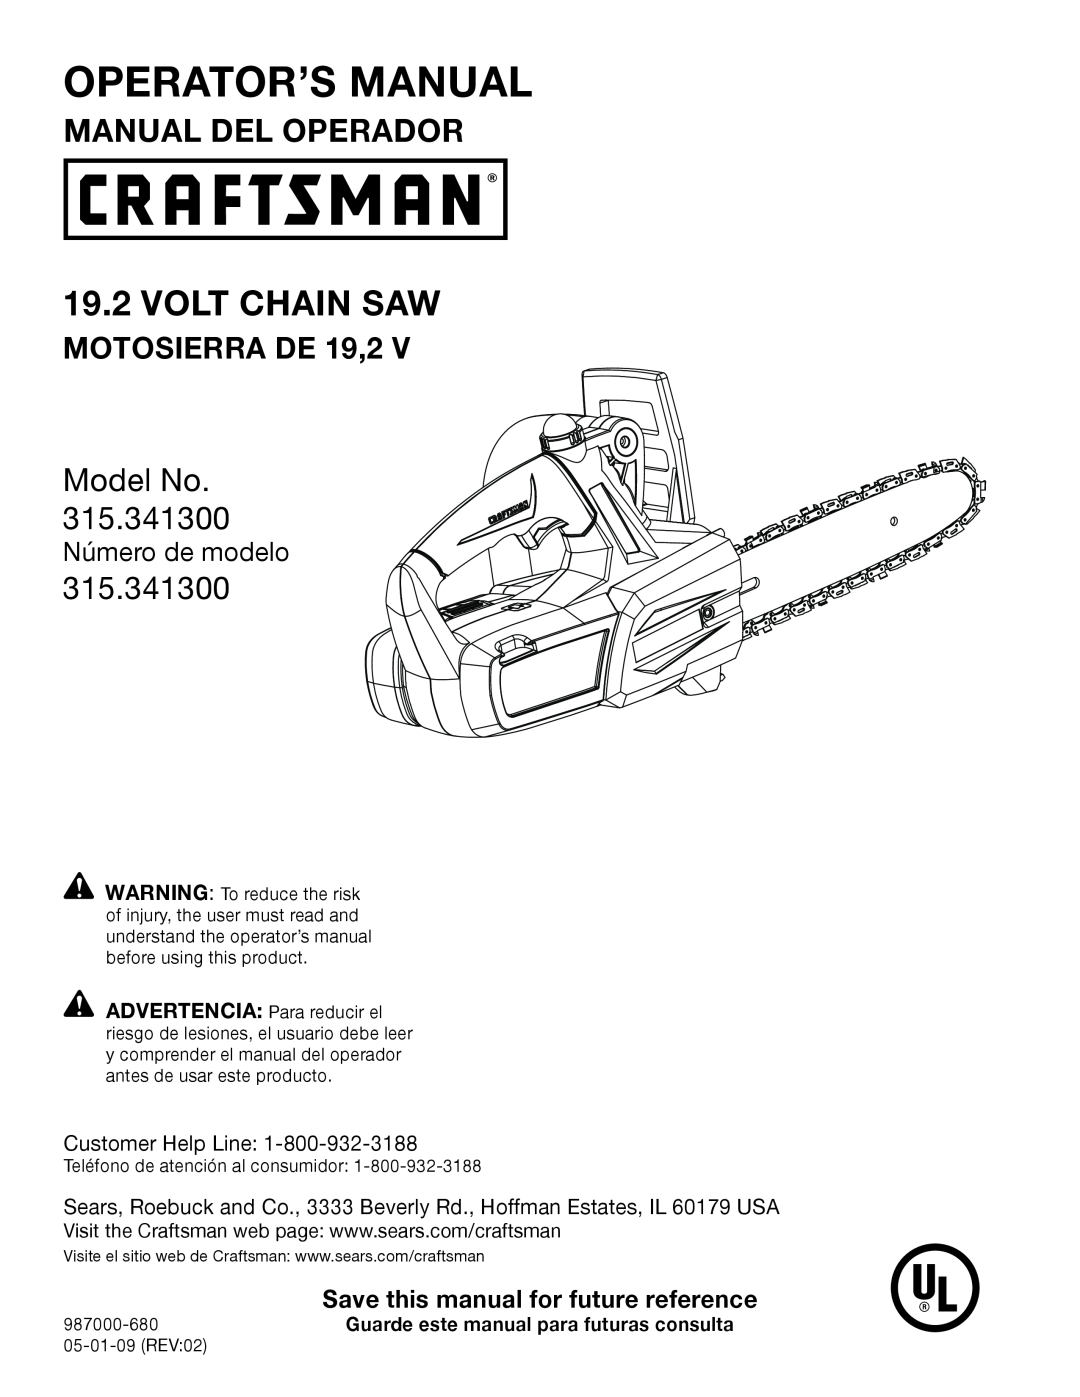 Craftsman 315.3413 manual VOLT cHAIN sAW, Manual Del Operador, Save this manual for future reference, Operator’S Manual 